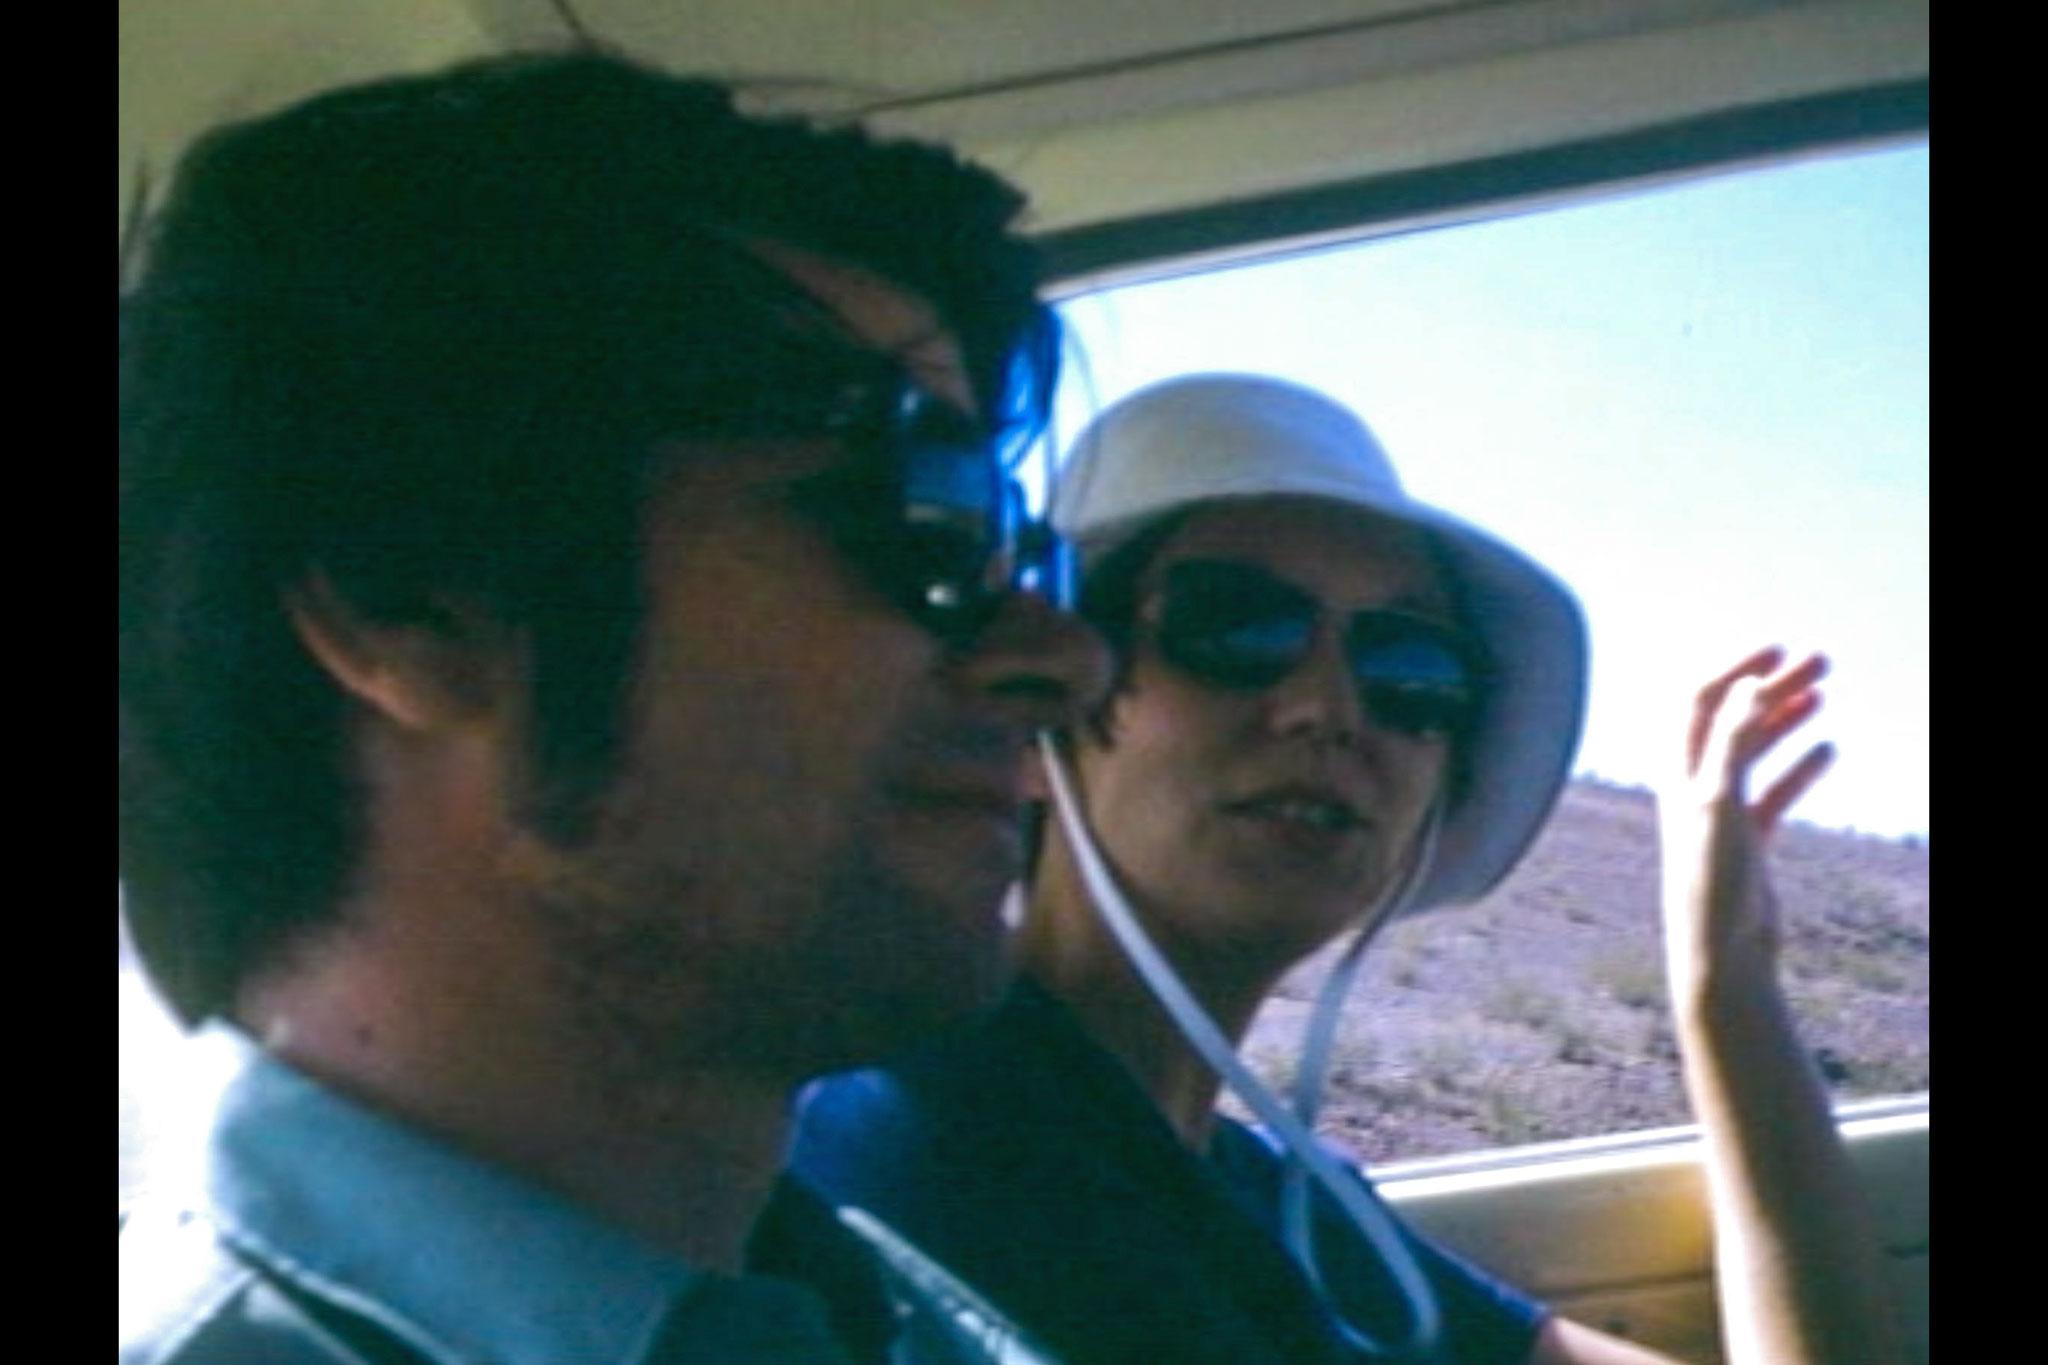 A young man and woman riding side by side in the backseat of a car.